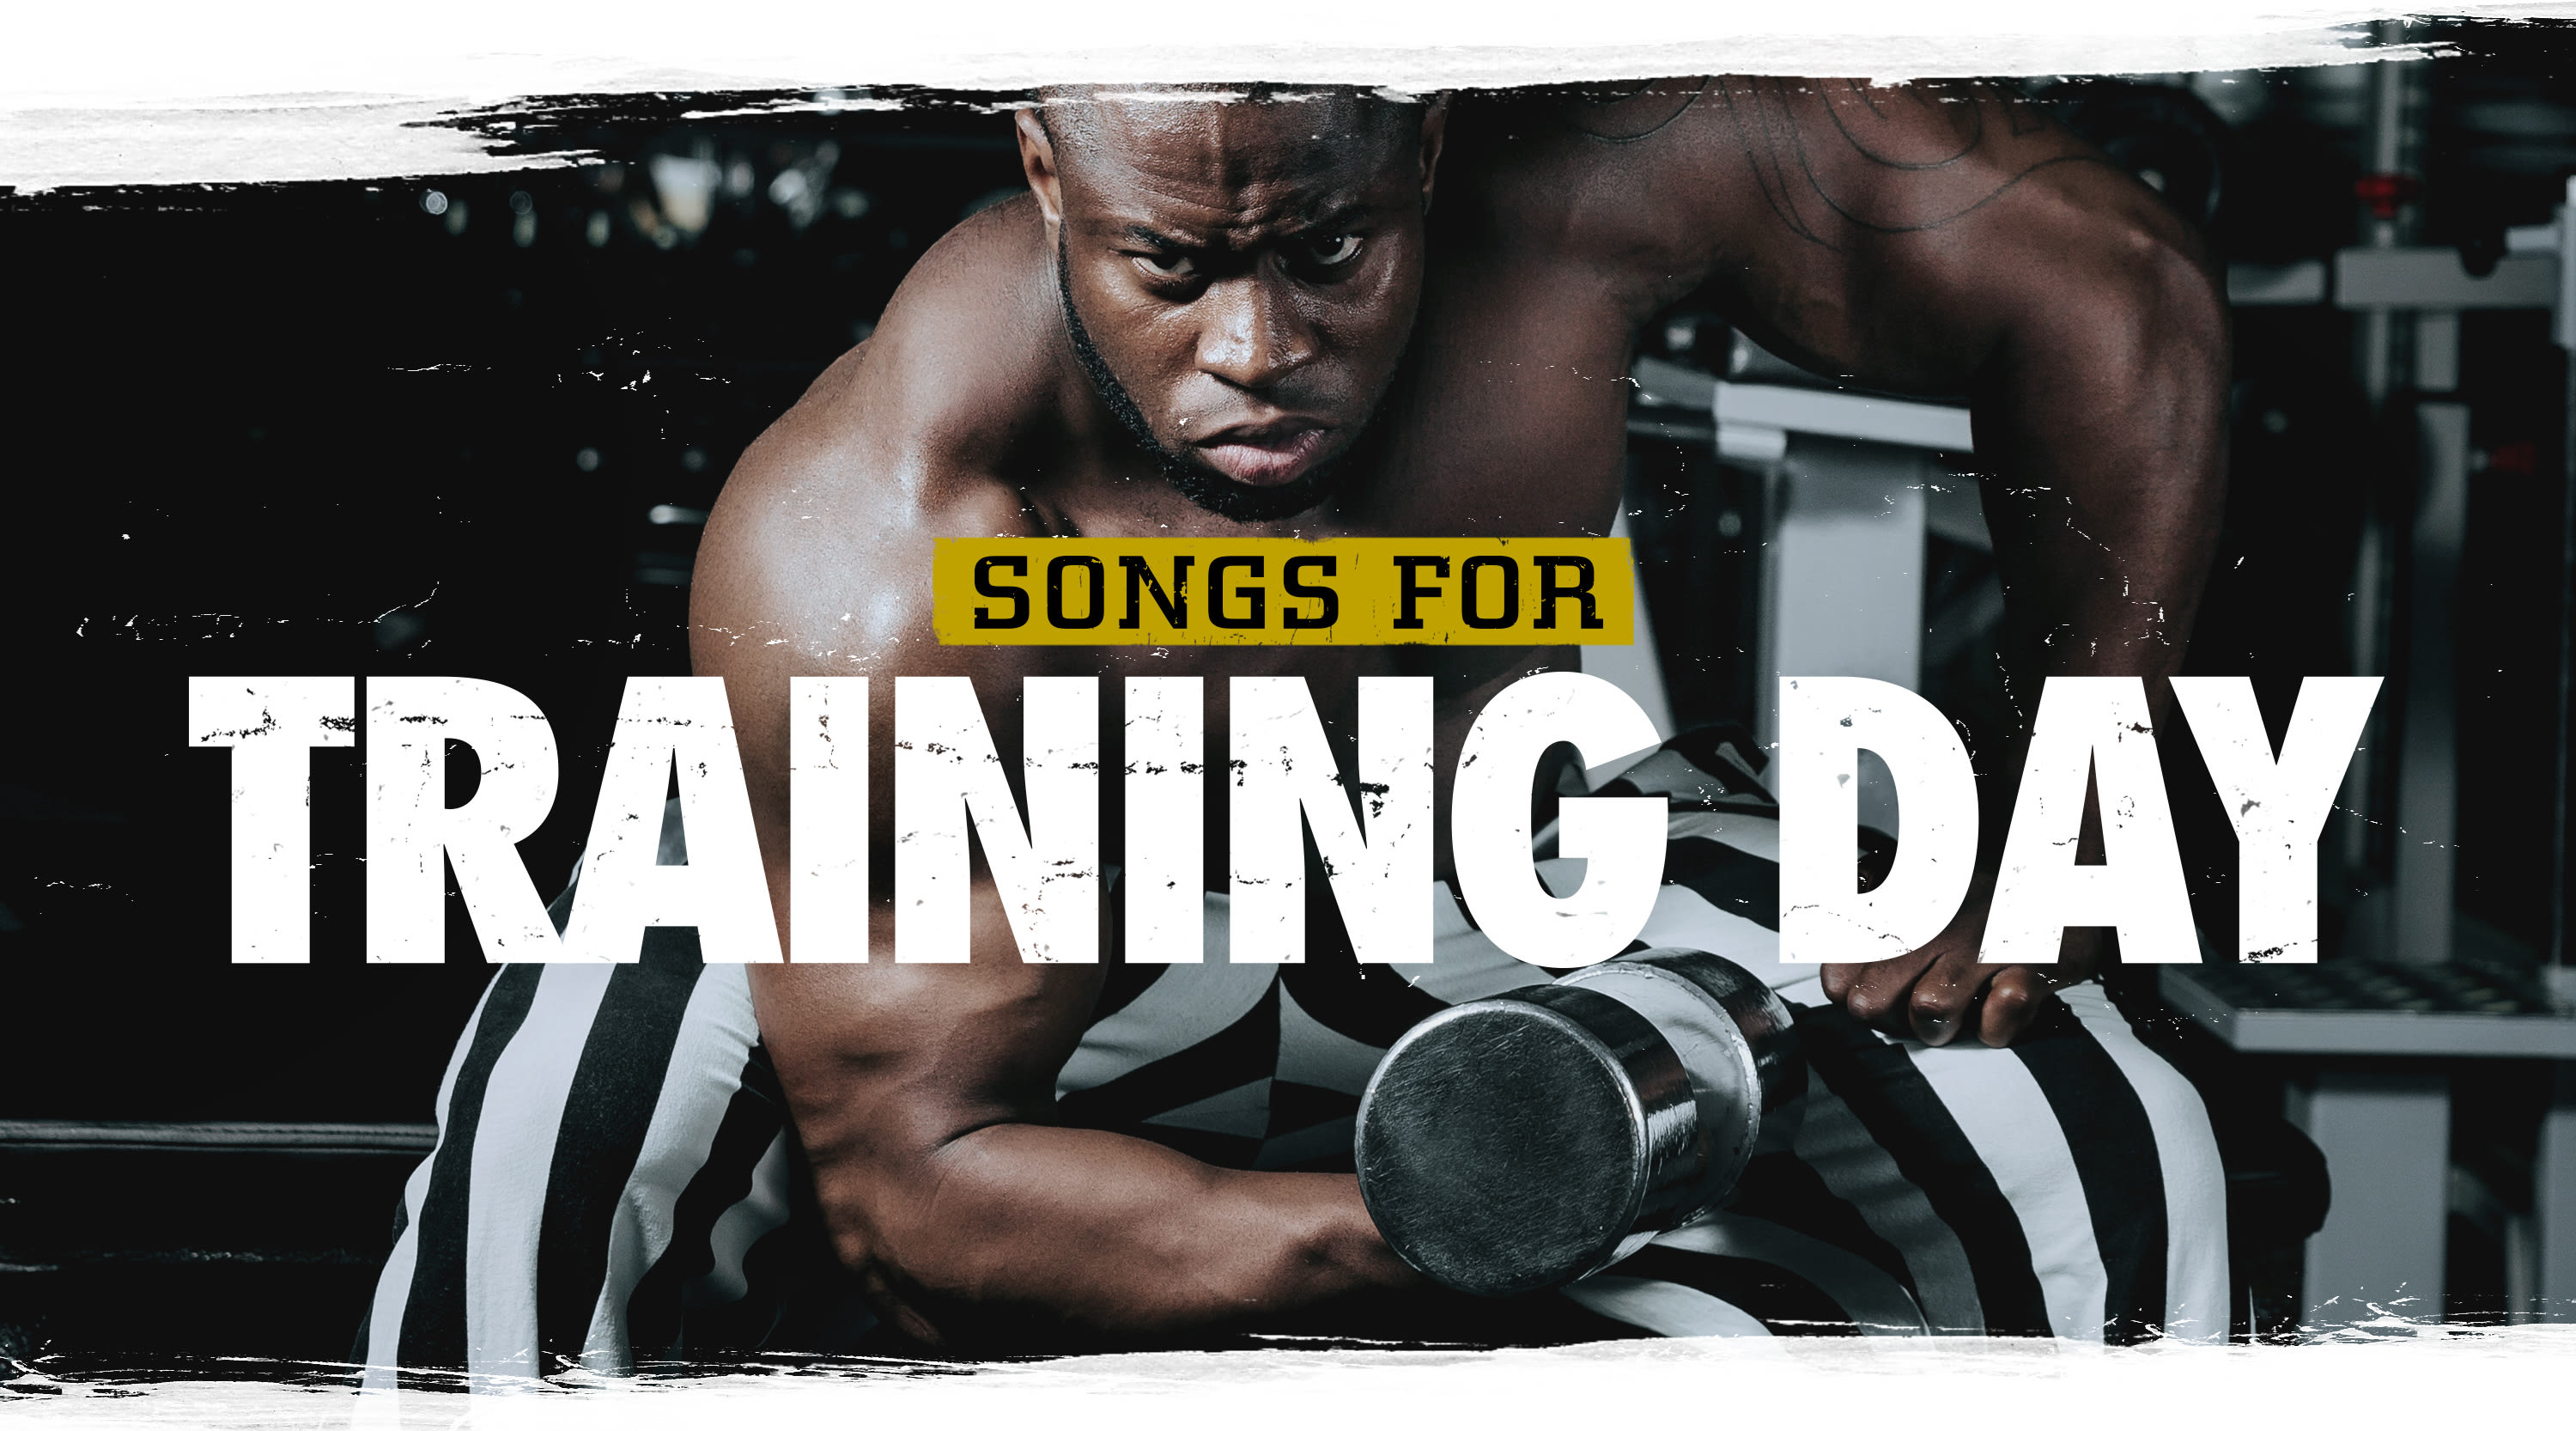 Songs for Training Day